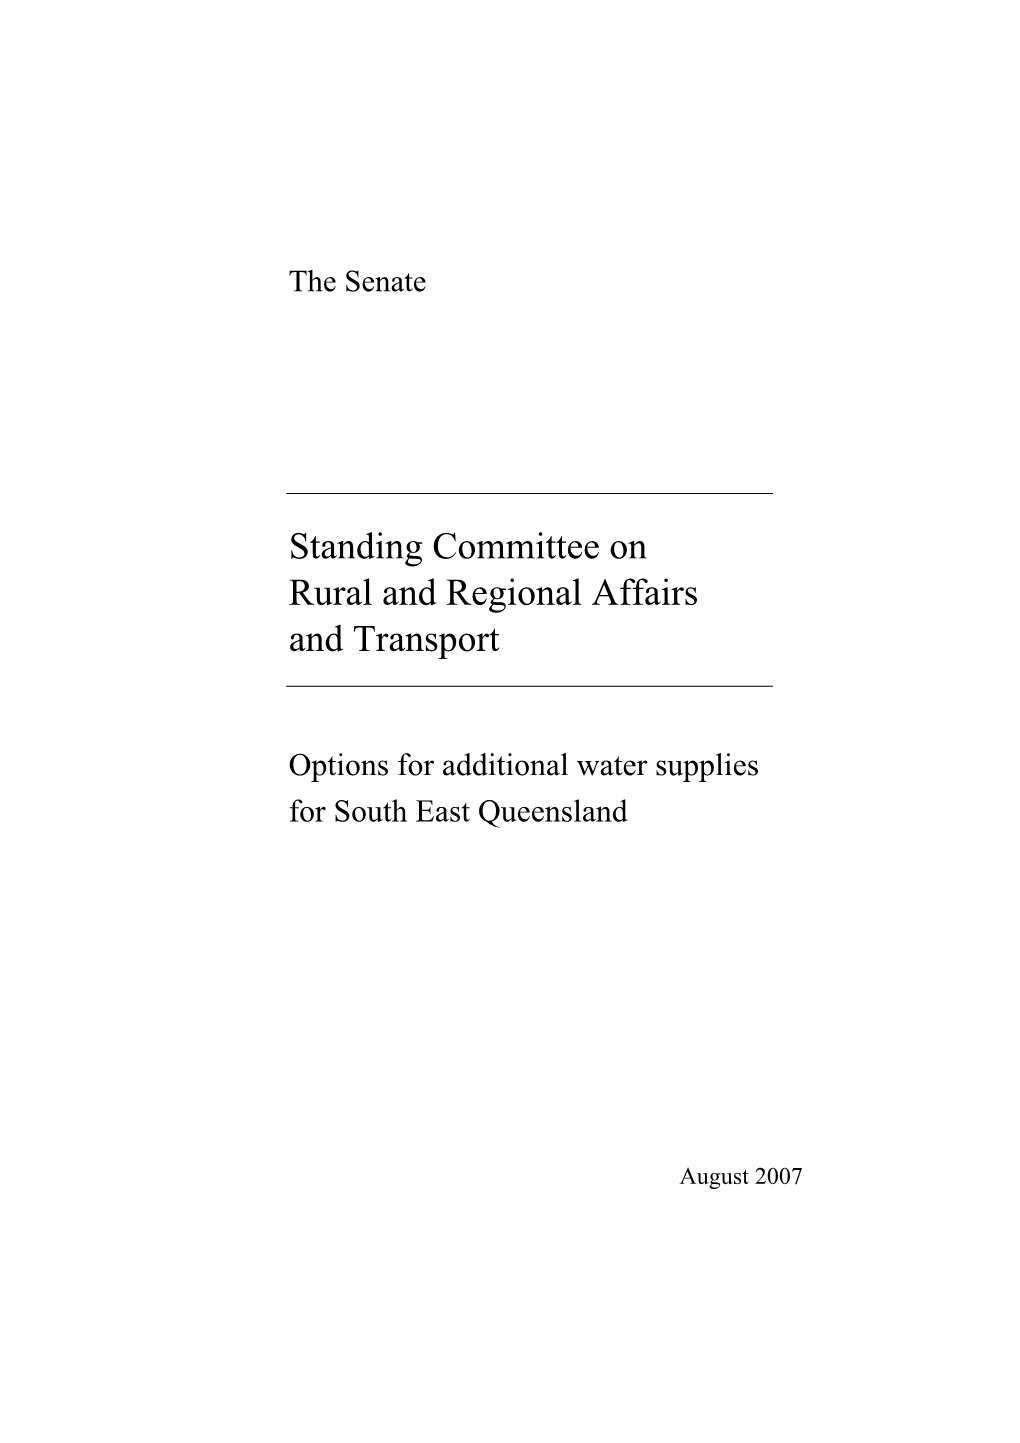 Standing Committee on Rural and Regional Affairs and Transport